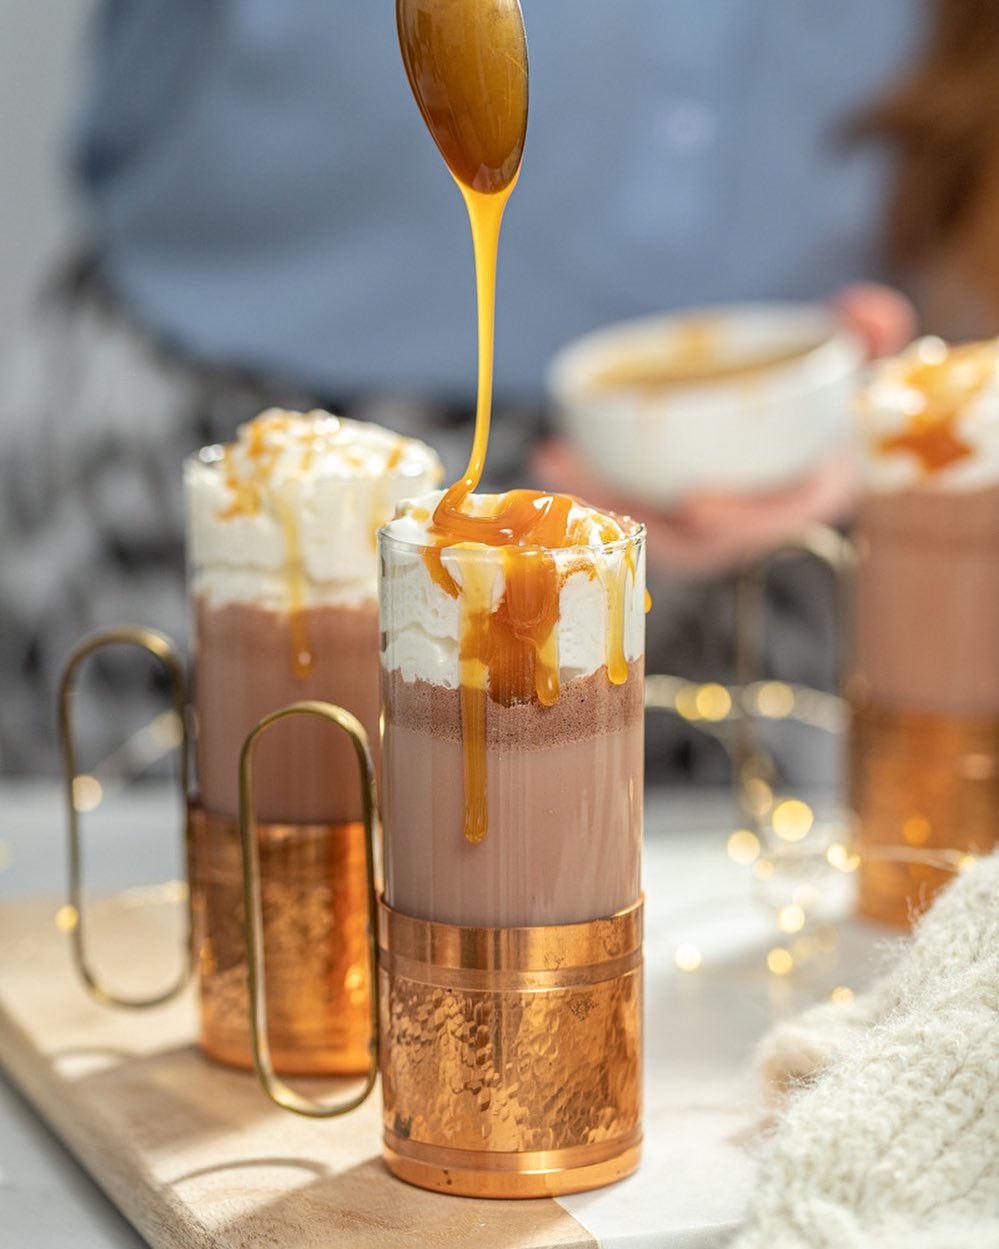 Caramel Hot Chocolate Drink with Caramel Drizzling Over Top. Photo by Instagram user @the.boozy.ginger